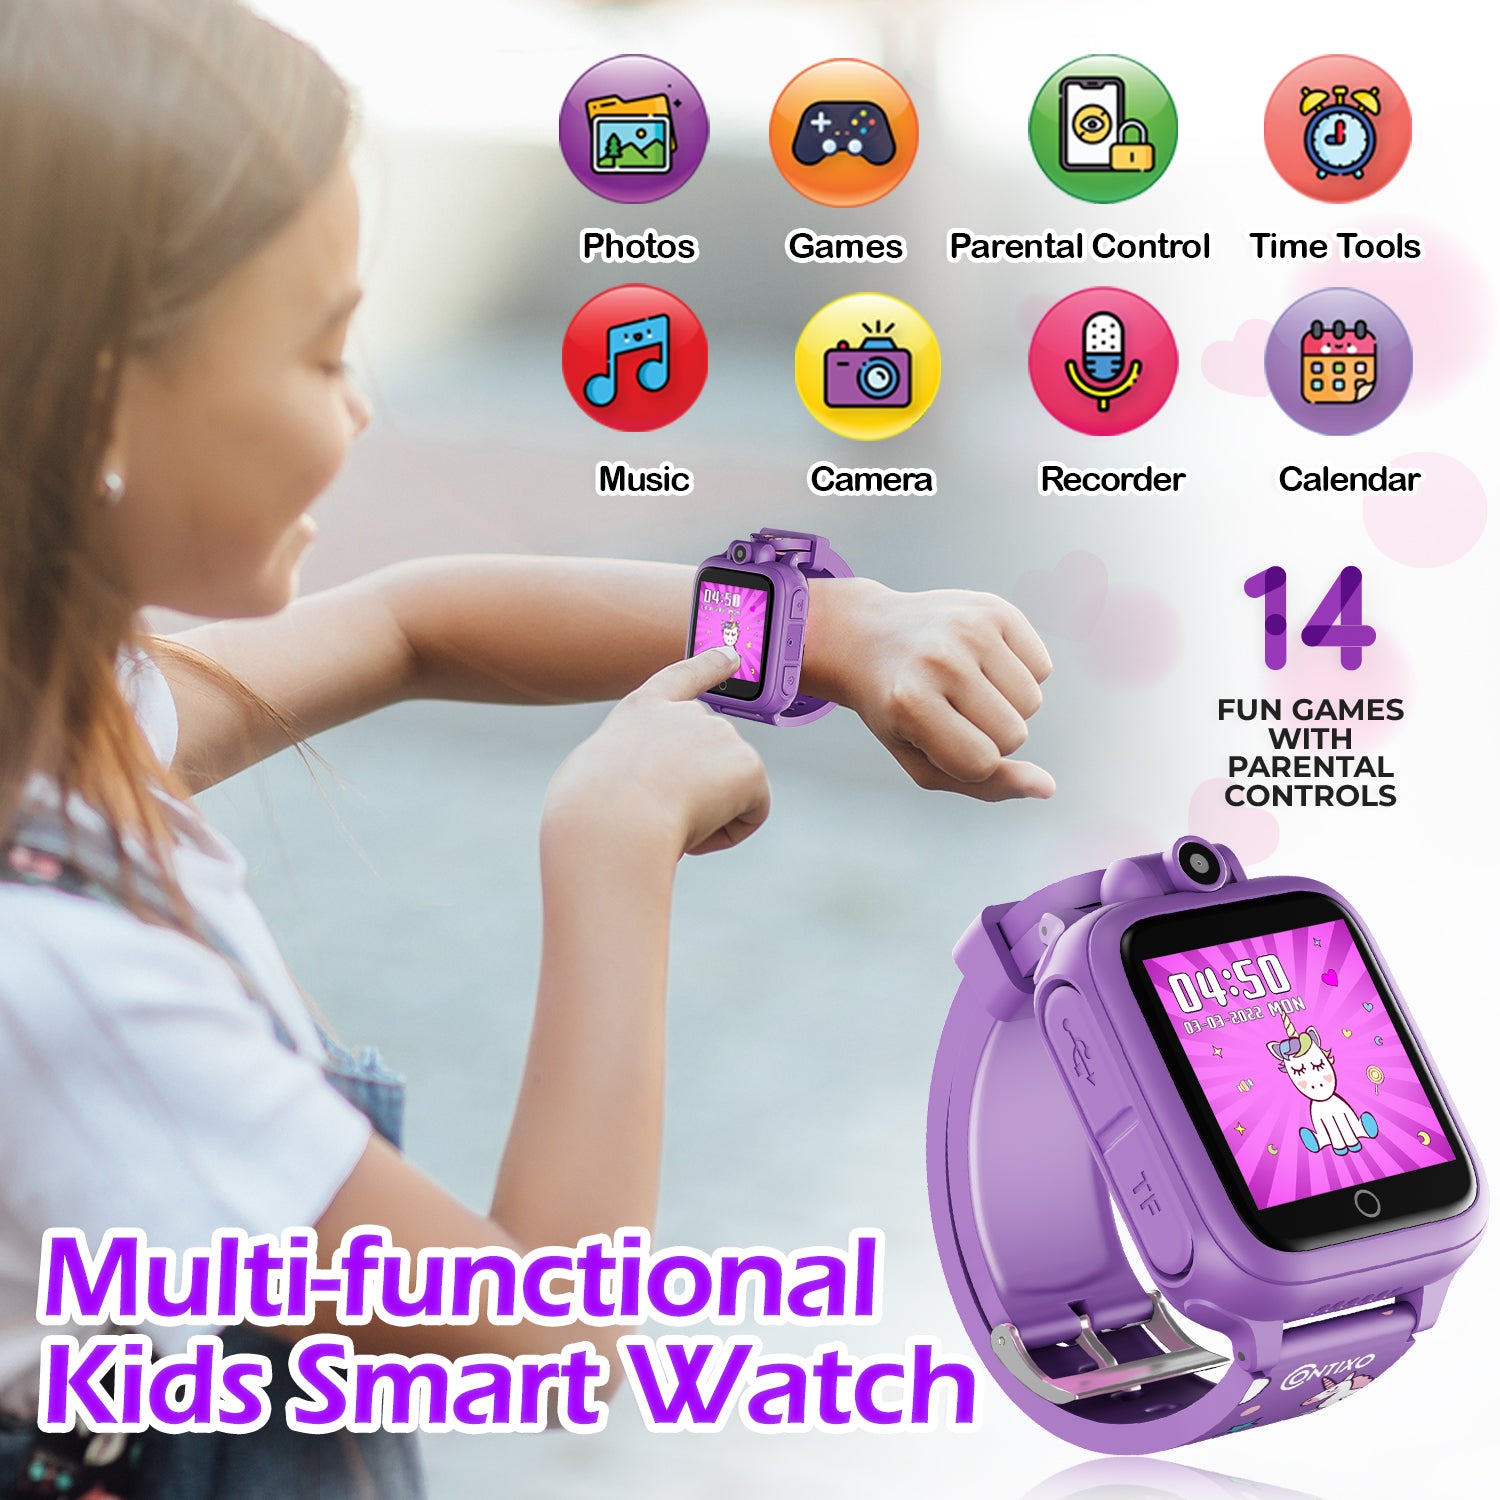 Contixo K102 10" Kids Tablet with Stylus and Smart Watch Bundle